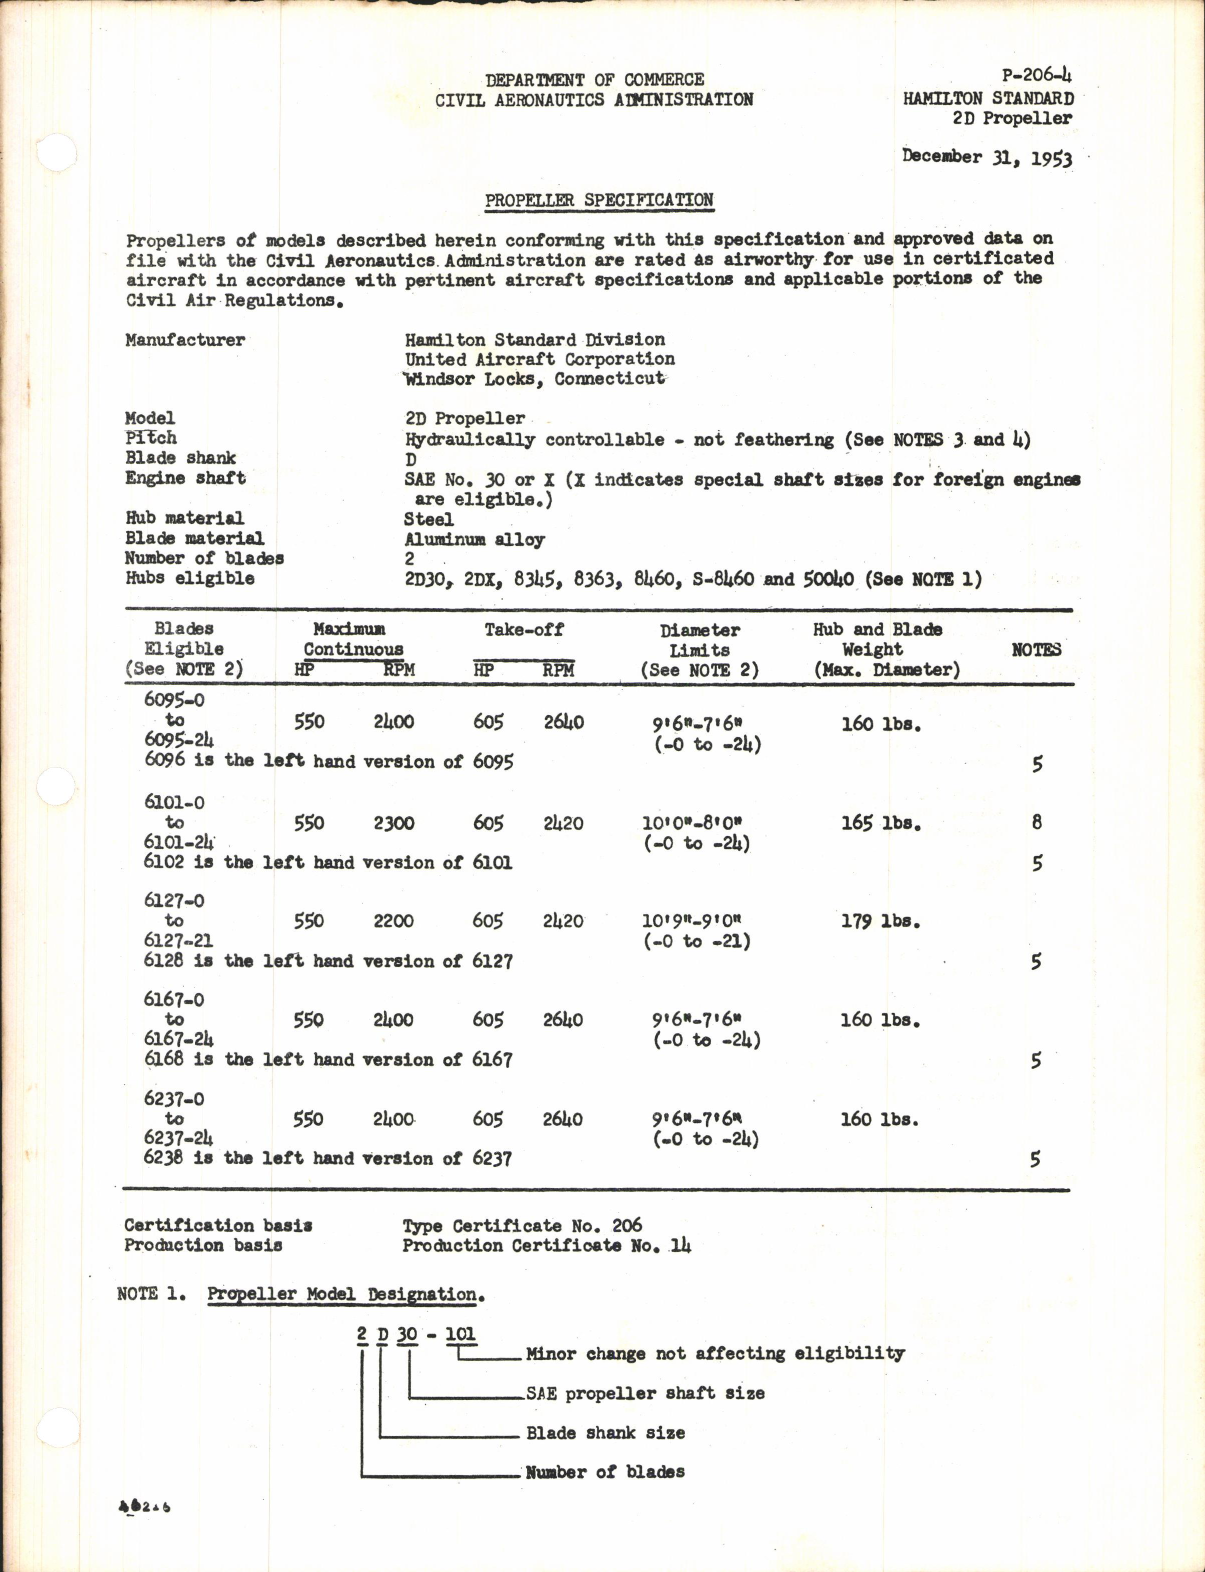 Sample page 1 from AirCorps Library document: Propeller Specification for 2D Propeller